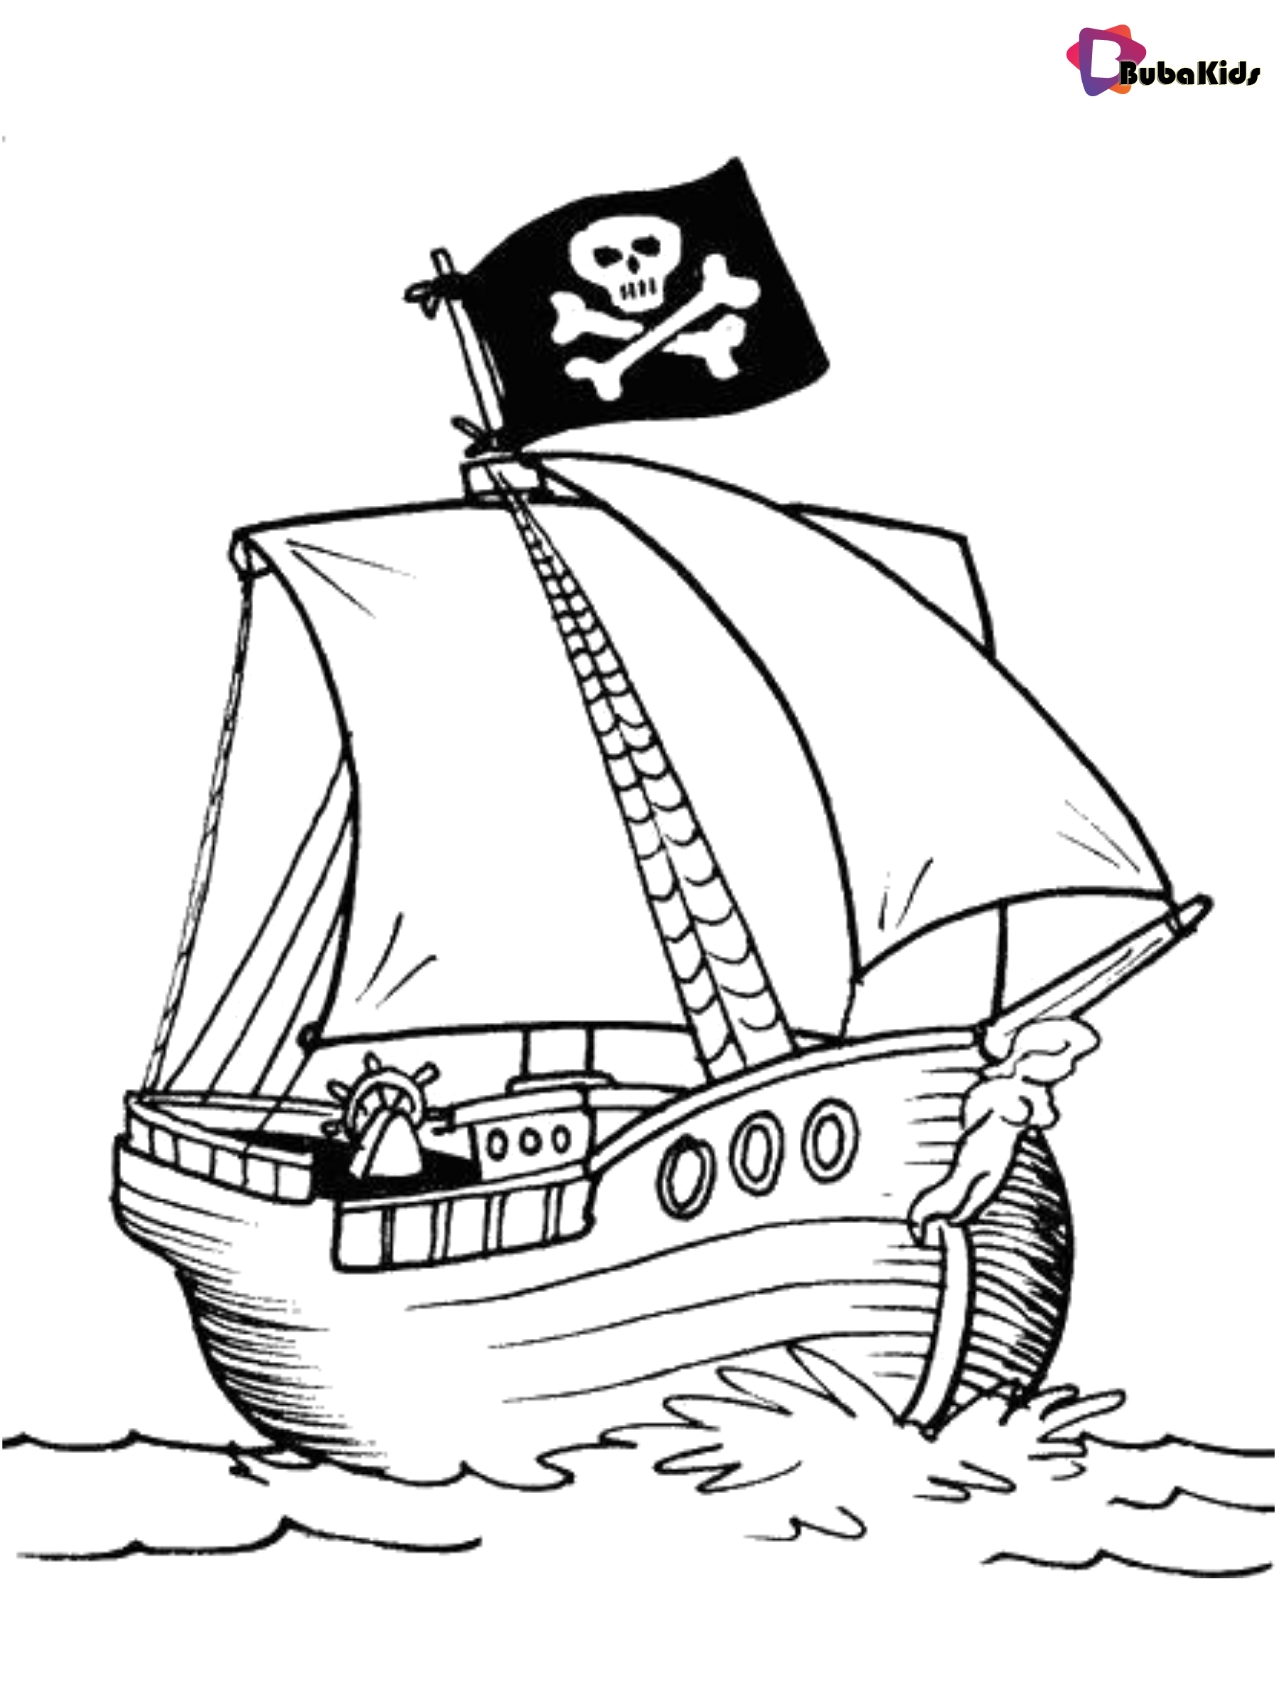 Coloring picture pirate ship free printable